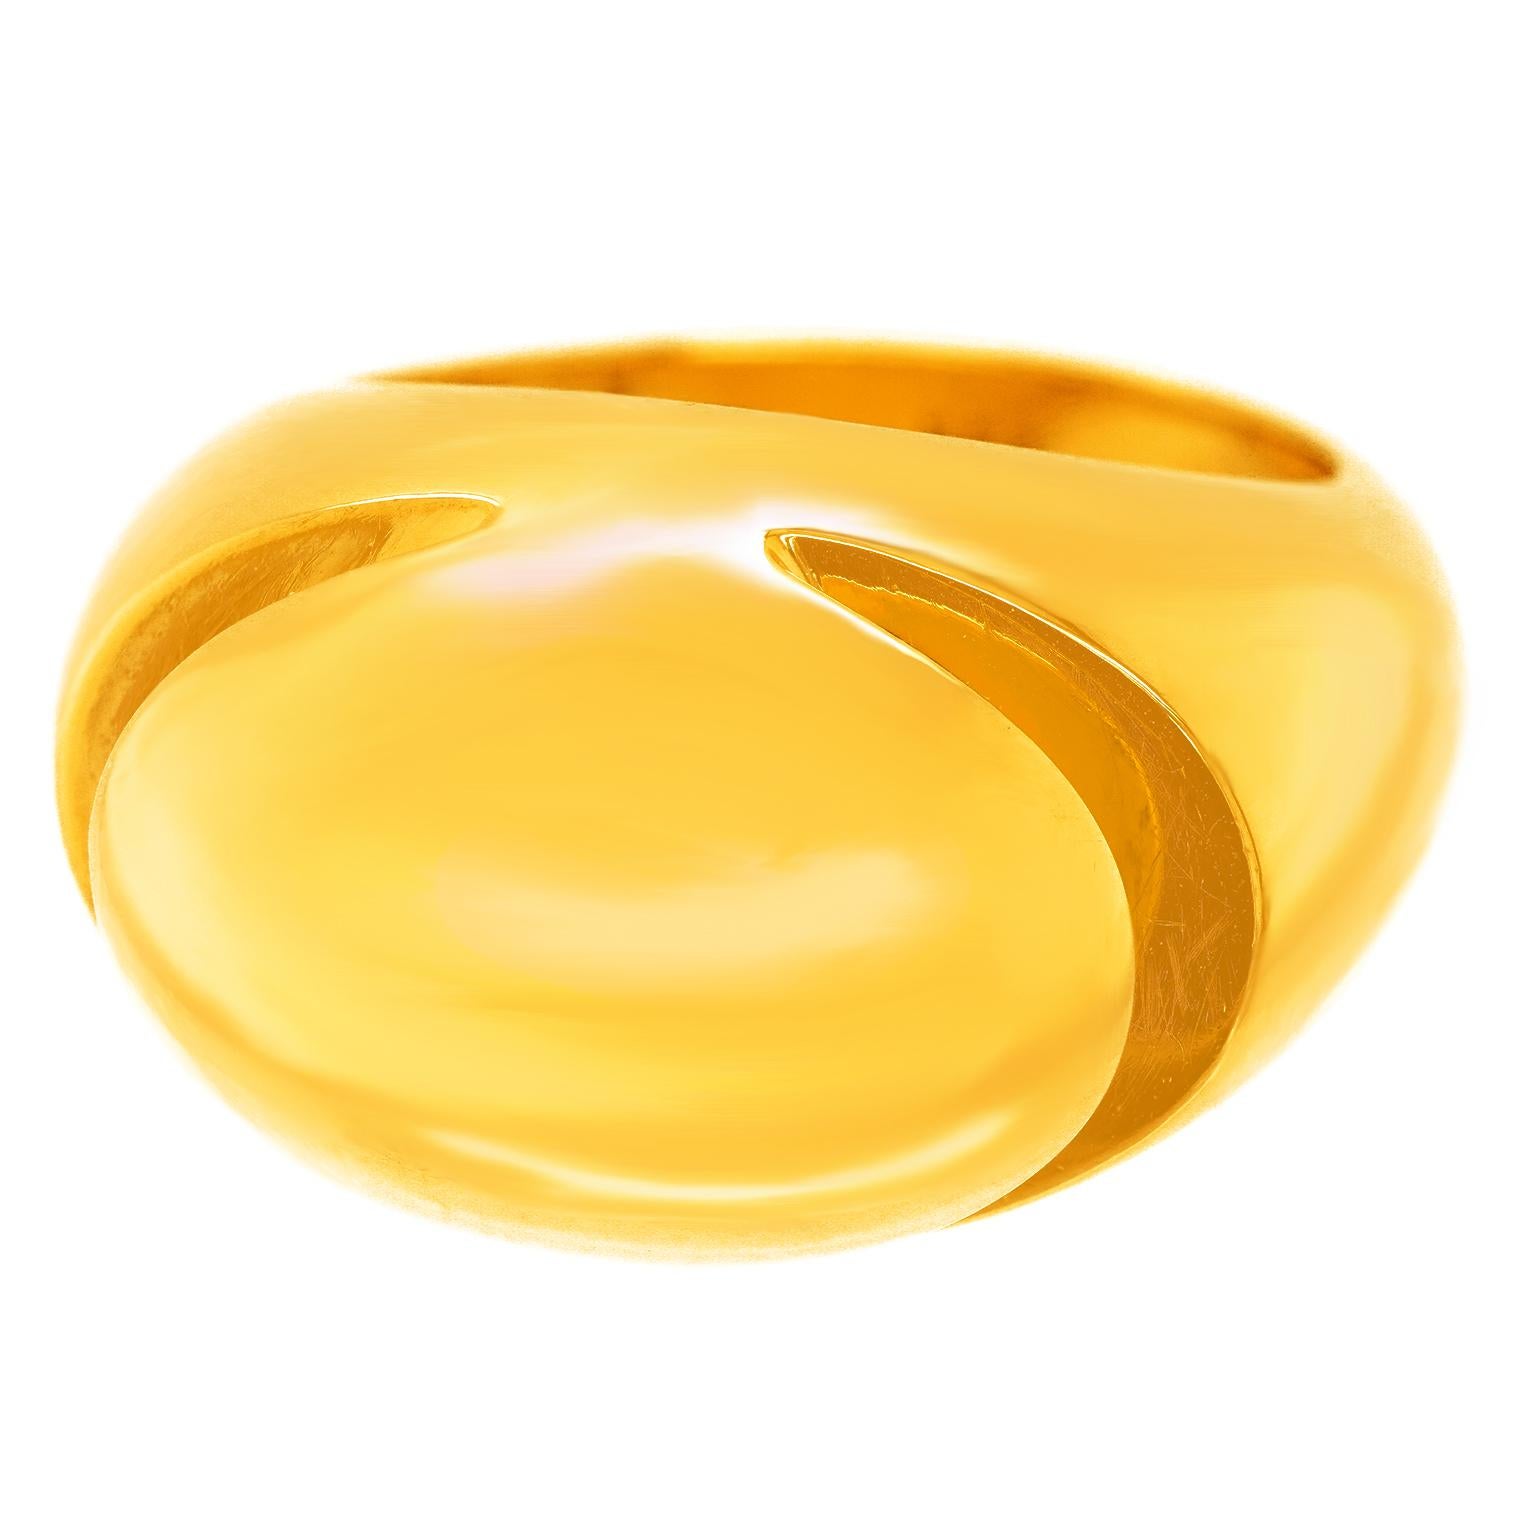 BVLGARI Yellow Gold Ring In Excellent Condition For Sale In Litchfield, CT